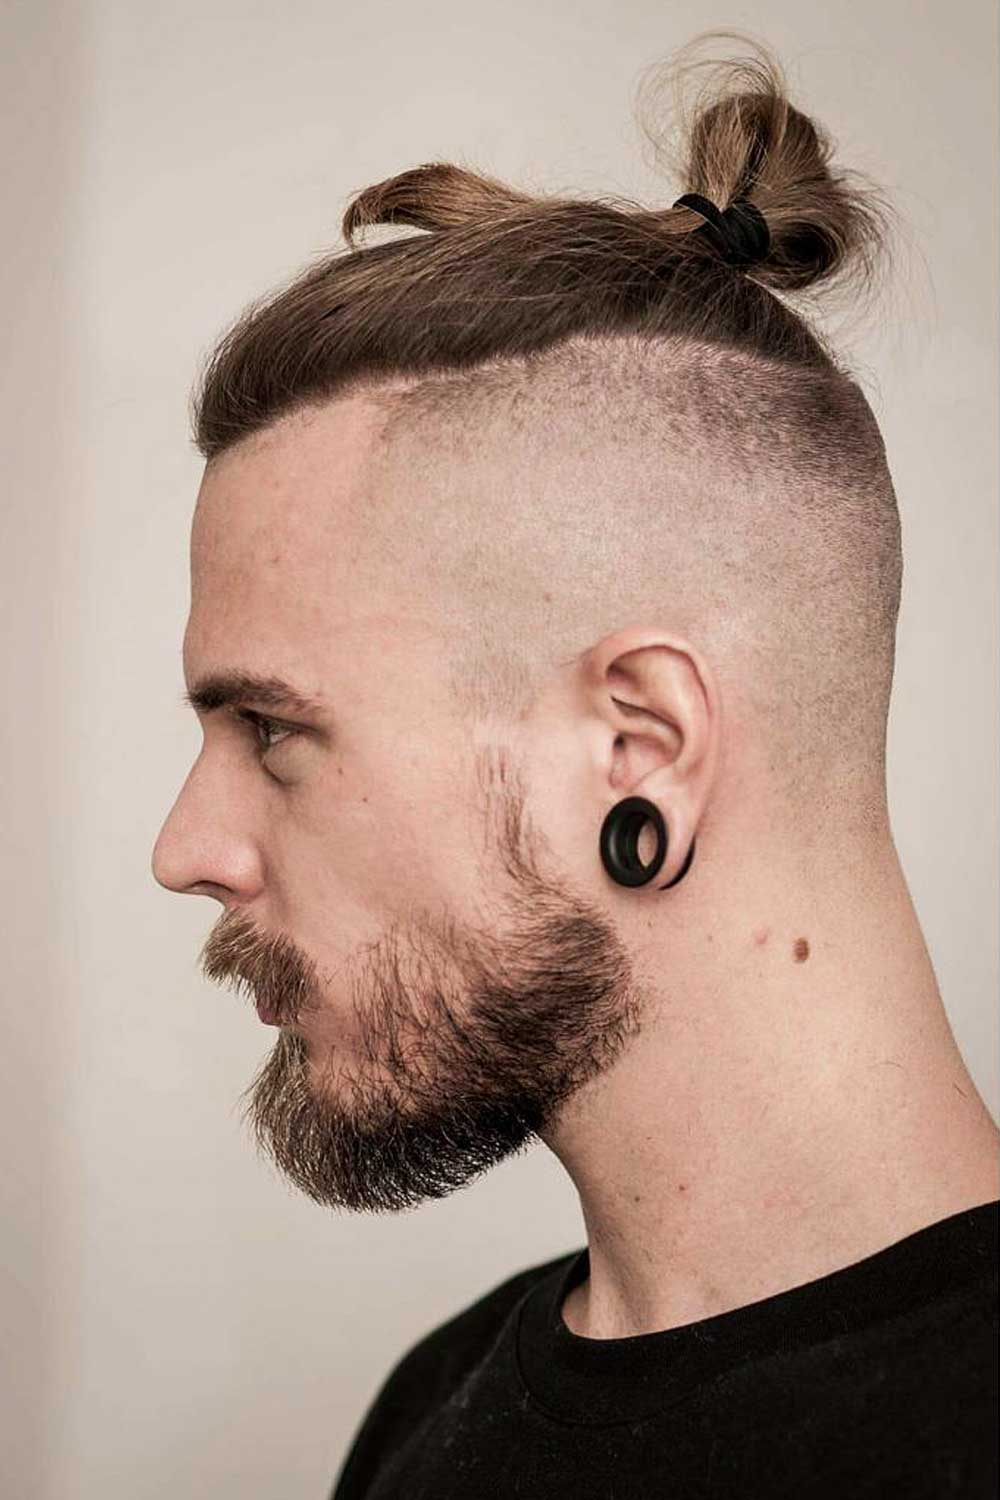 Here's How To Grow Out An Undercut The Right Way